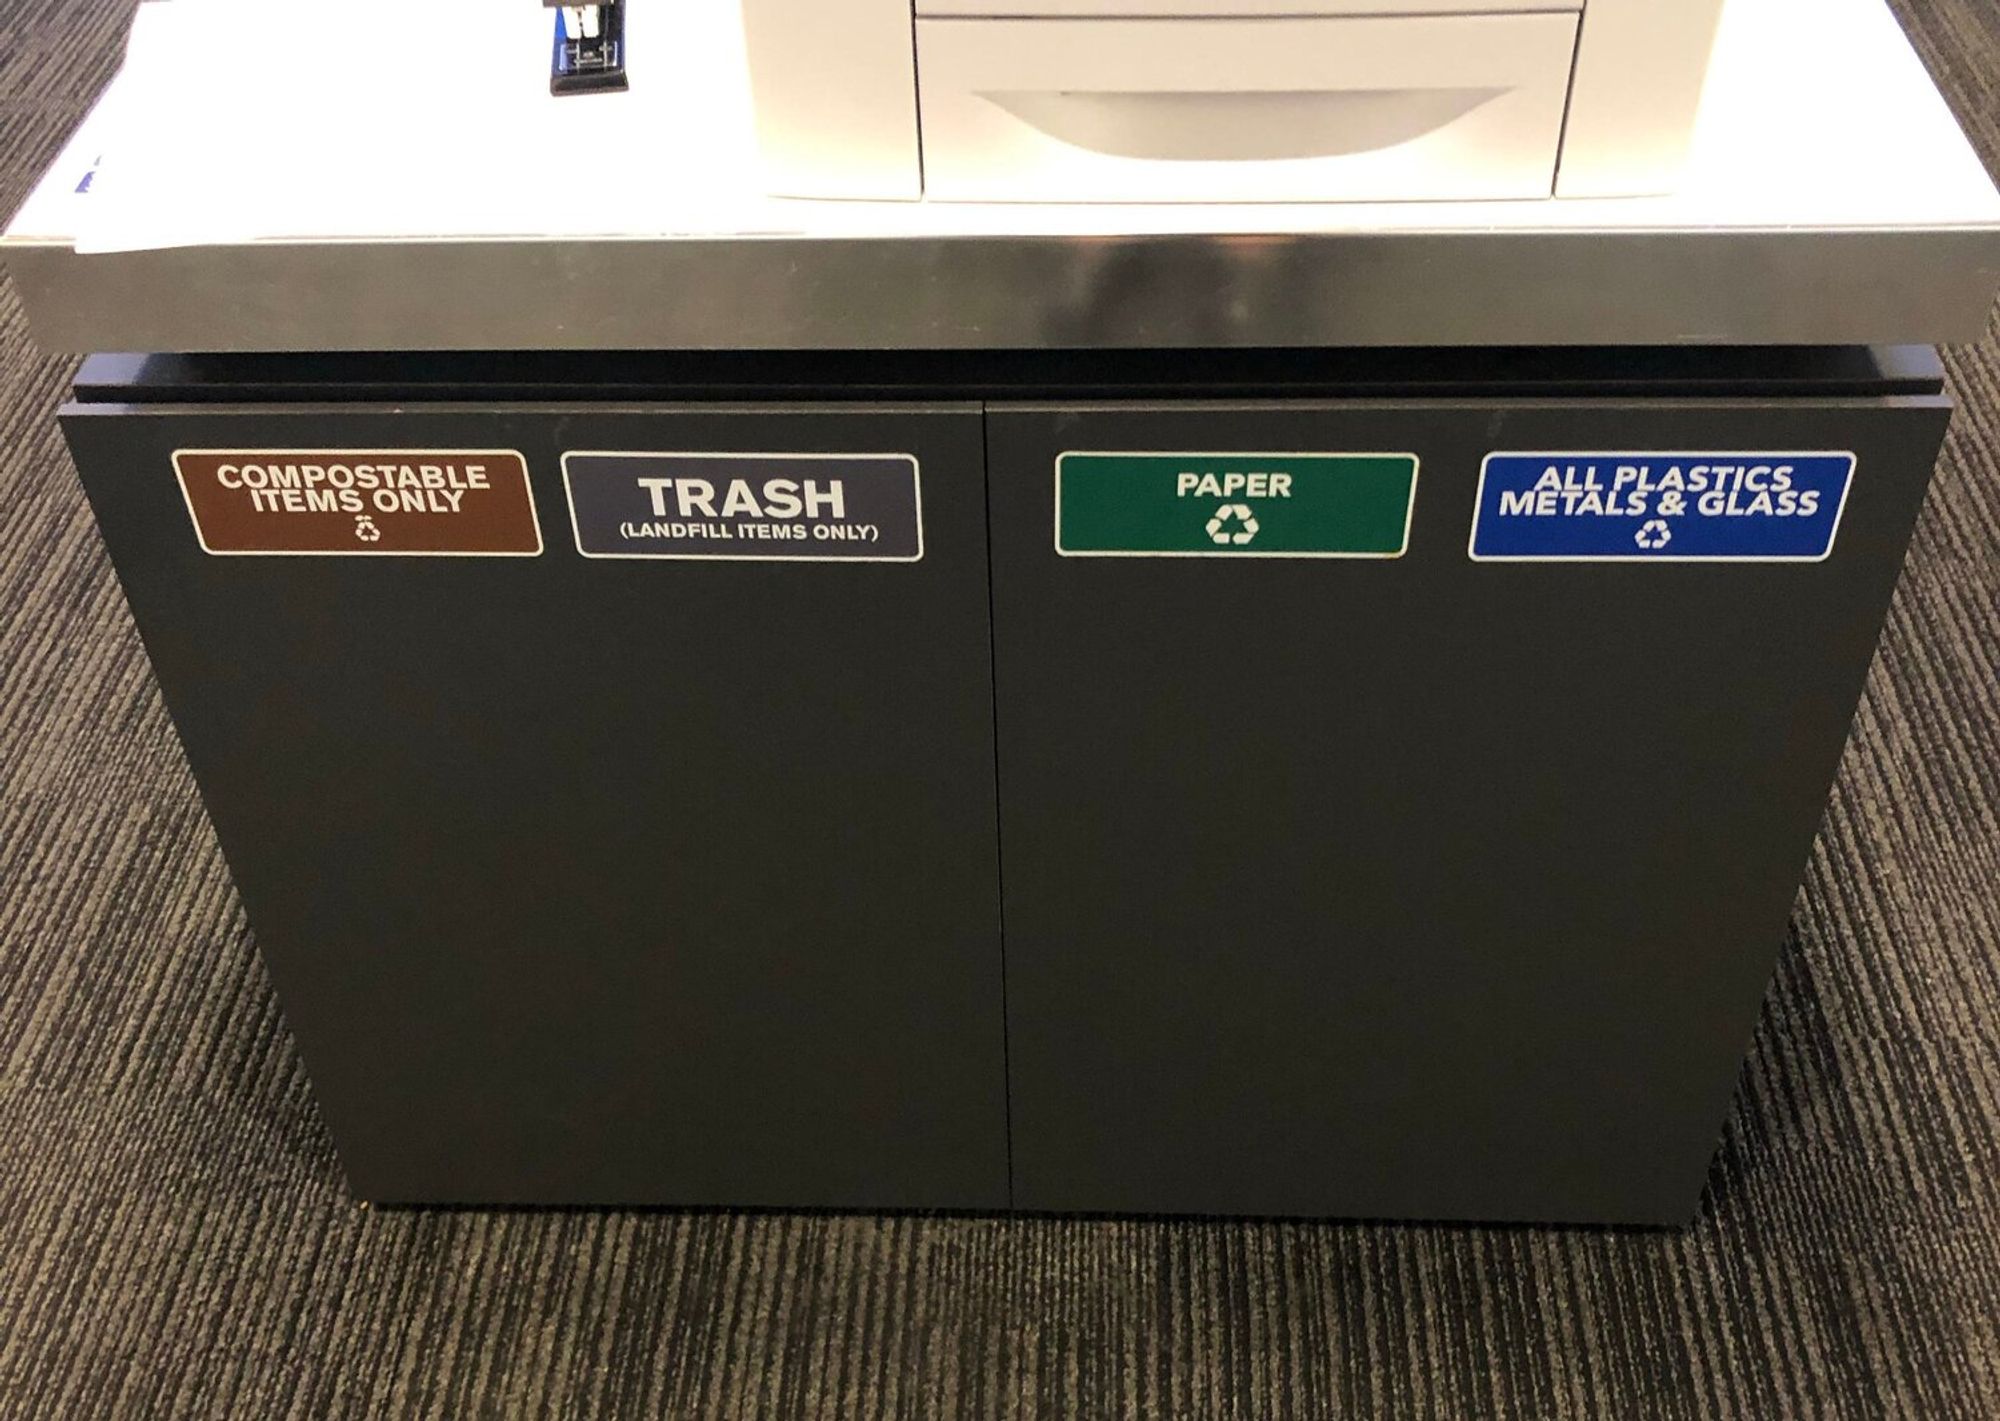 A typical waste station at a Bloomberg office. It includes compost, landfill, paper recycling and plastic recycling.